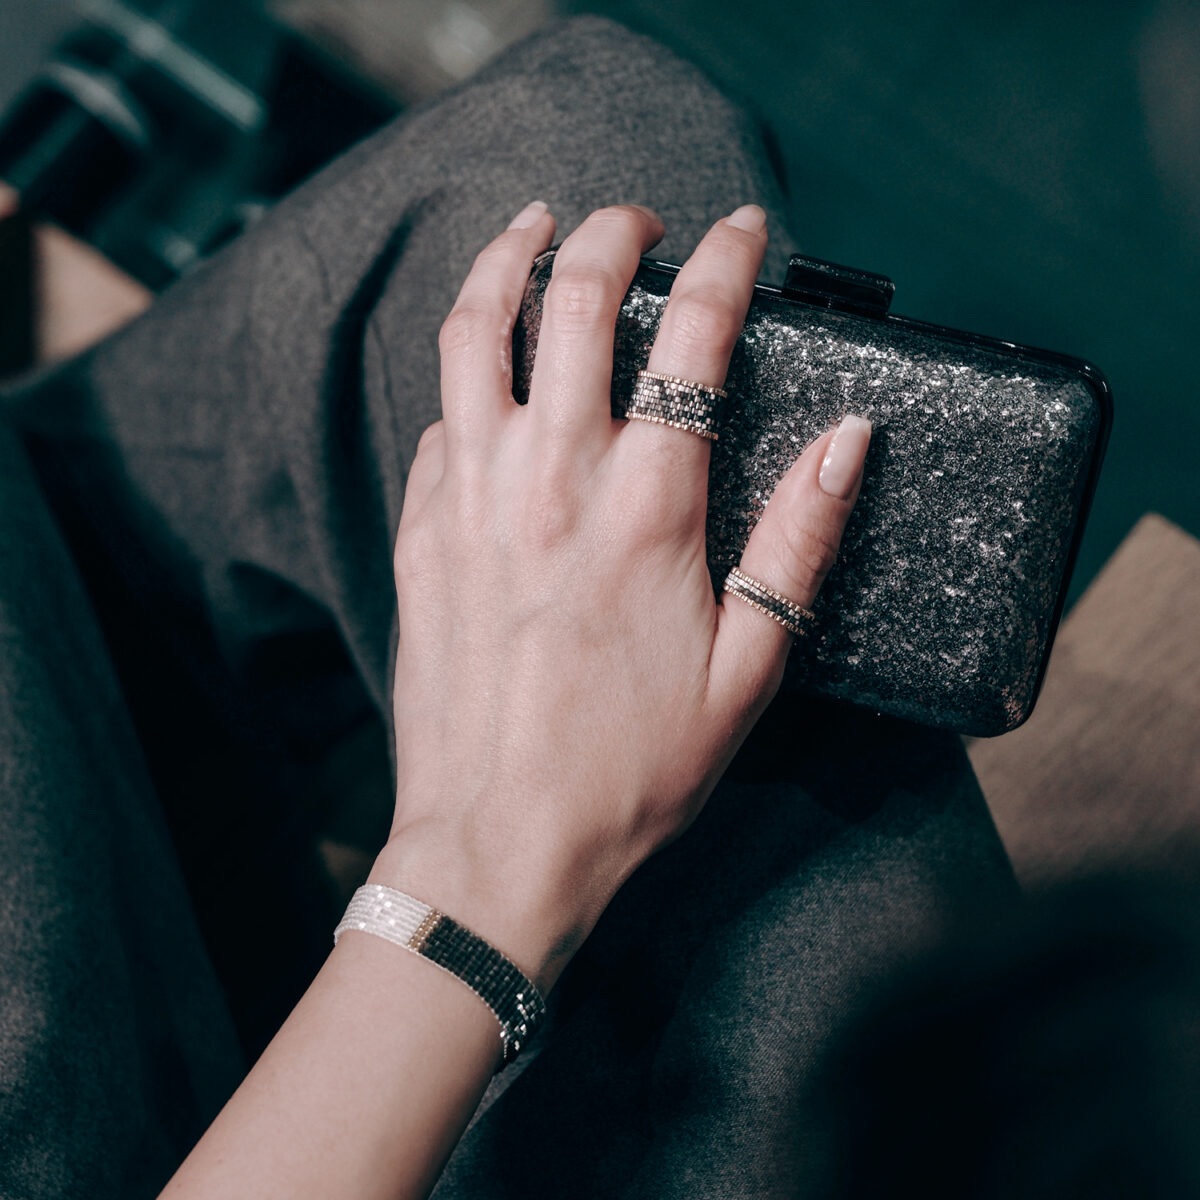 Close-up of a woman's hand with stylish glittery jewelry holding a black clutch purse.